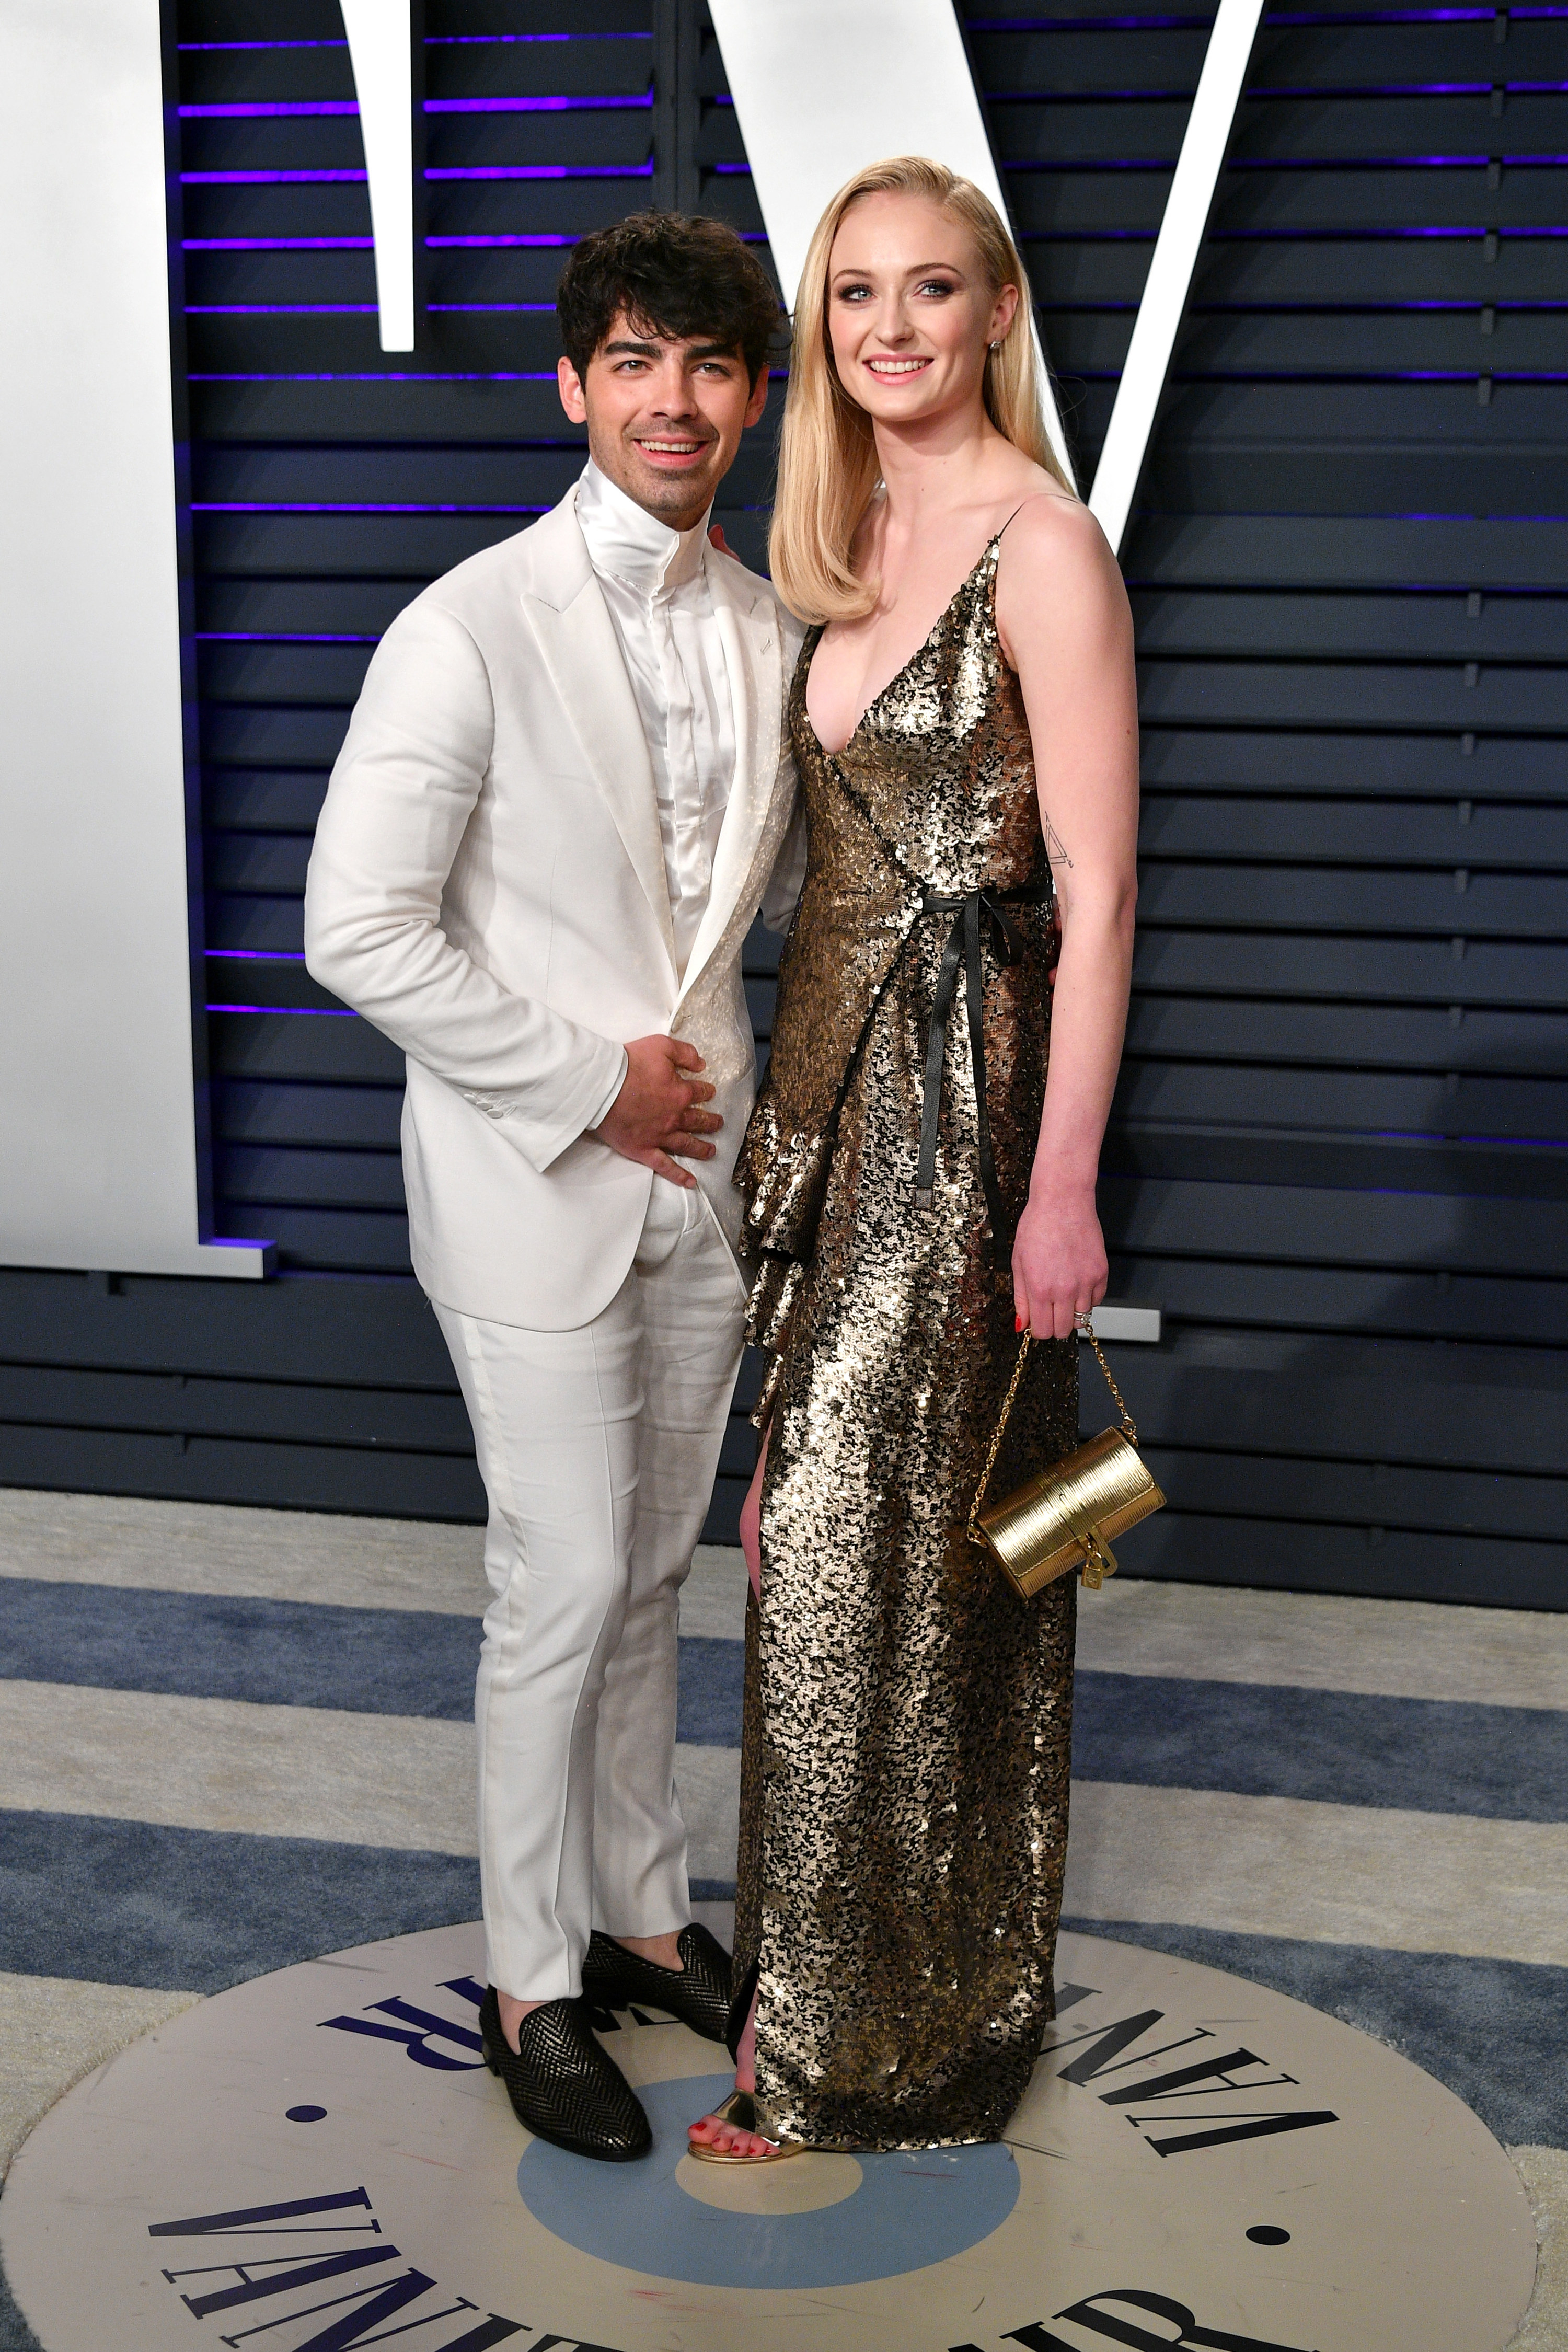 Joe wears a white suit and Sophie wears a shimmering gold gown